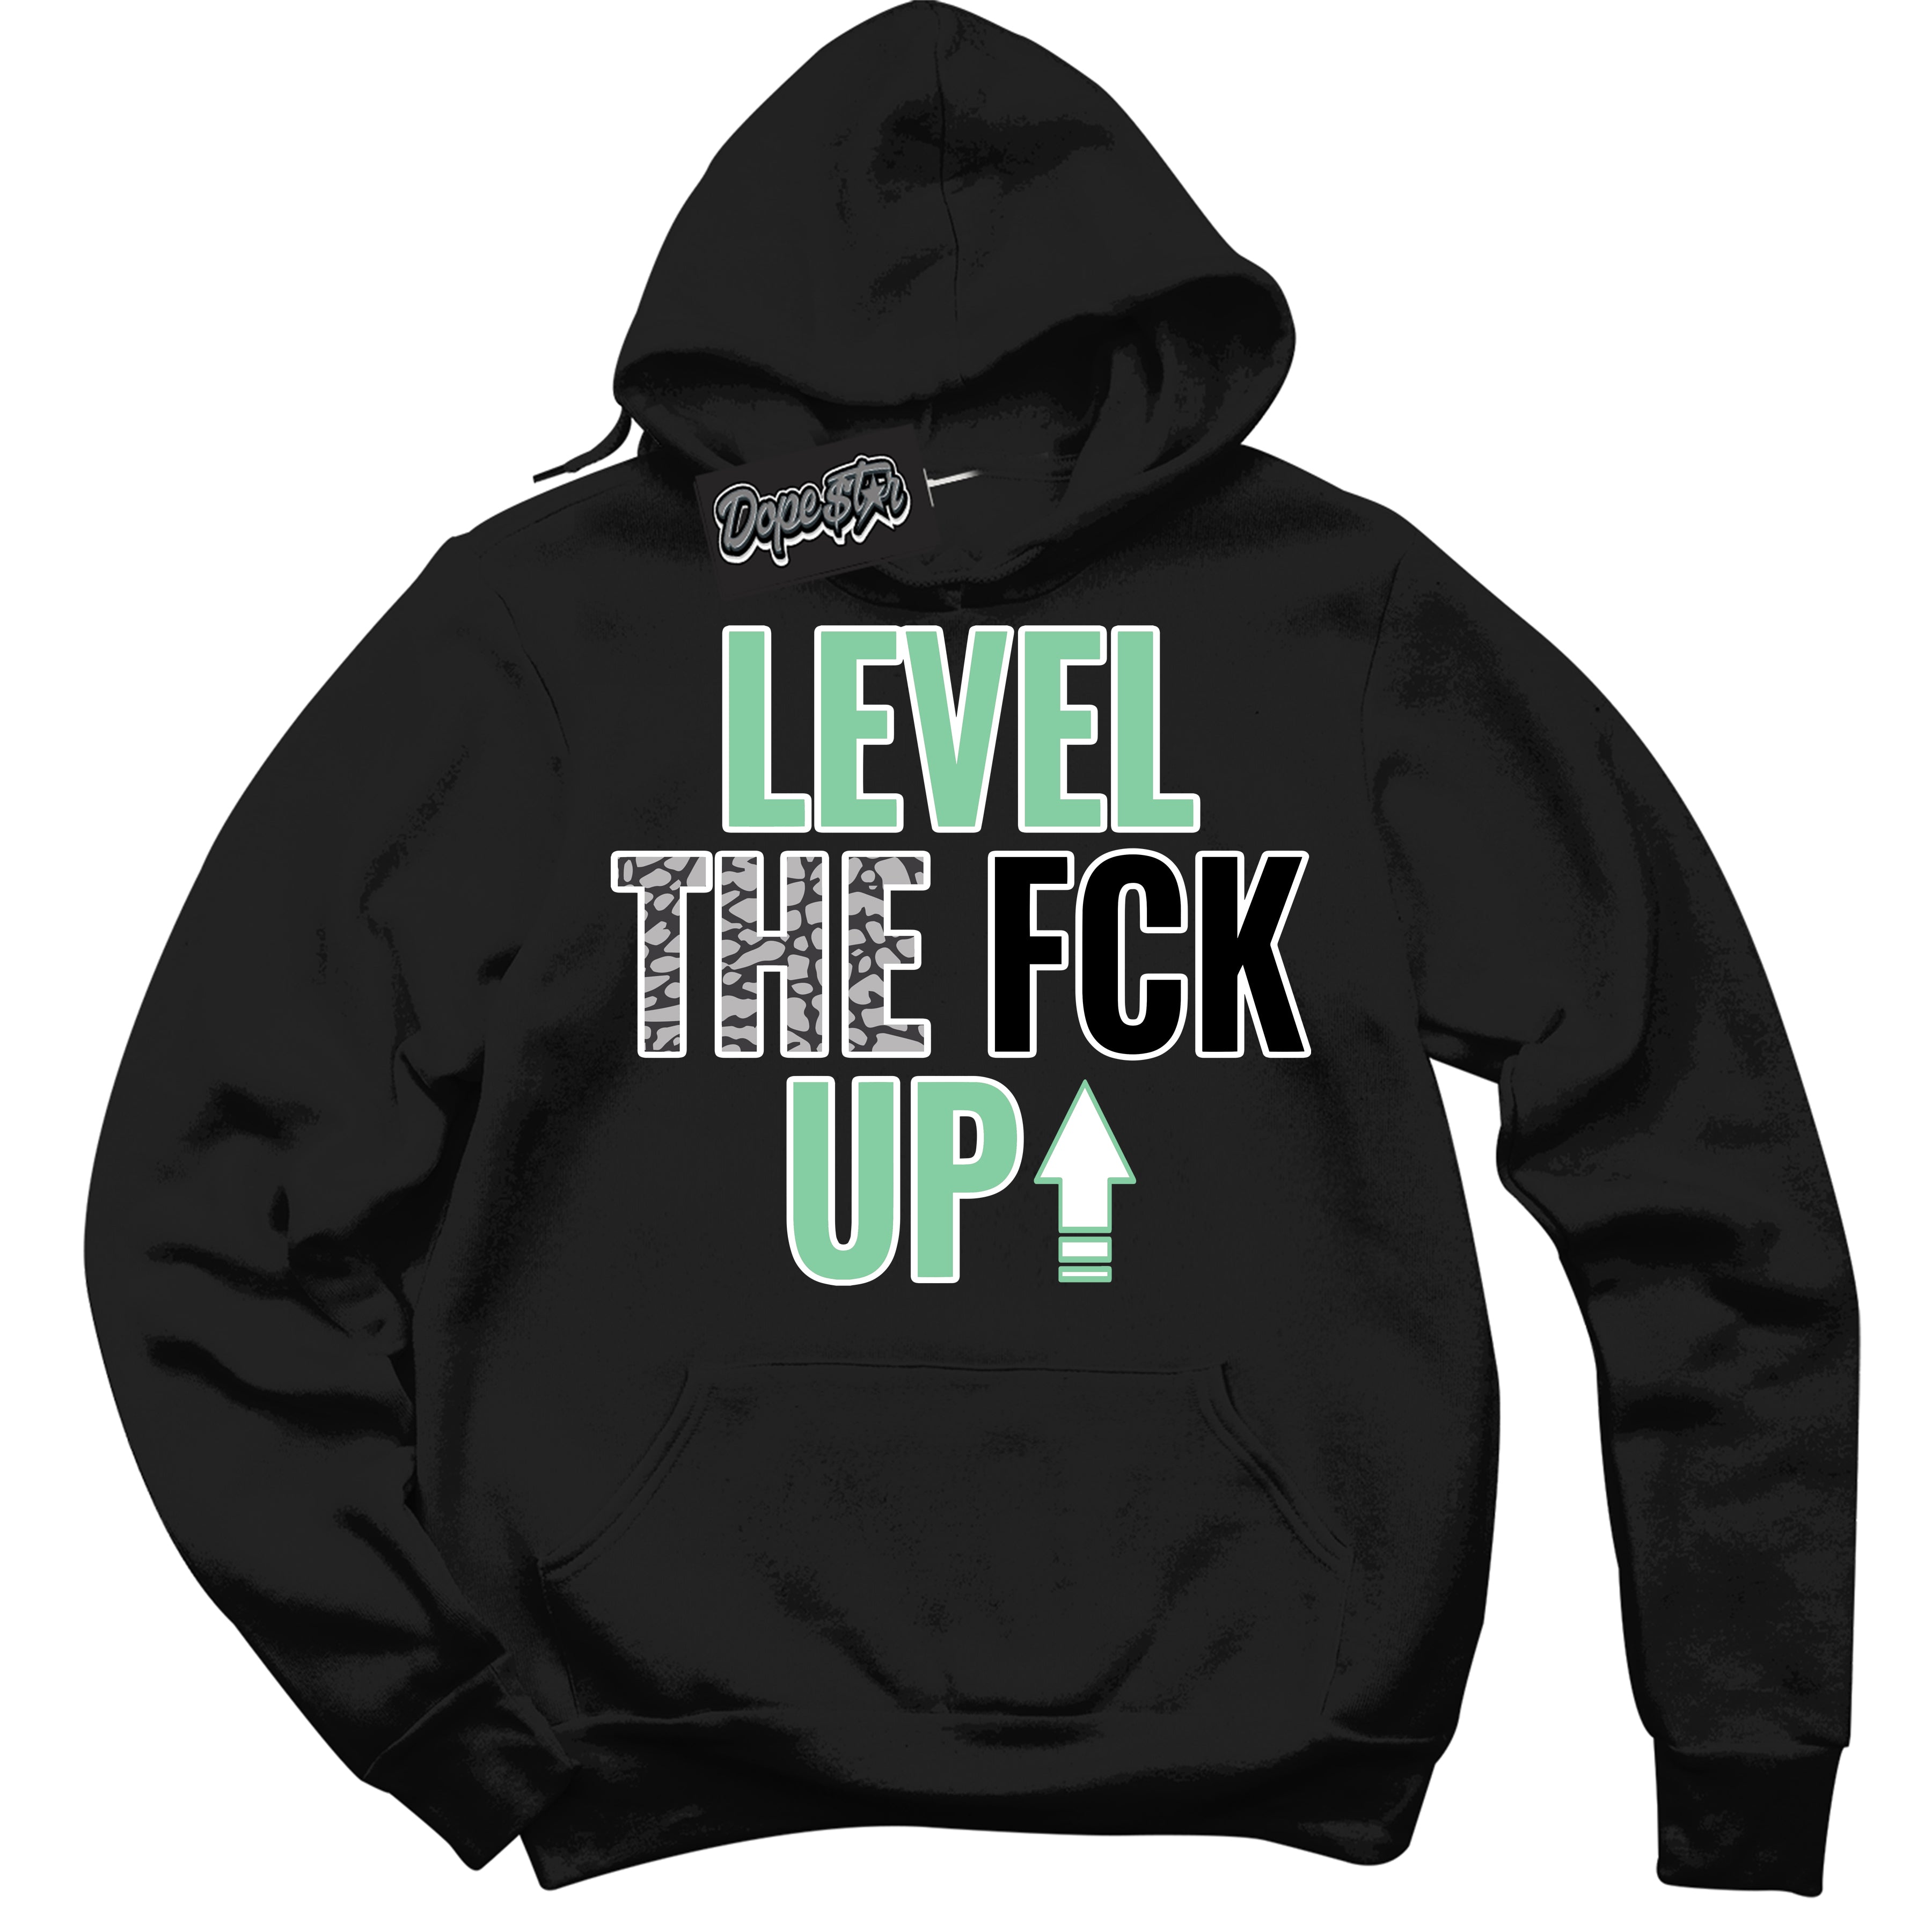 Cool Black Graphic DopeStar Hoodie with “ Level The Fck Up “ print, that perfectly matches Green Glow 3S sneakers